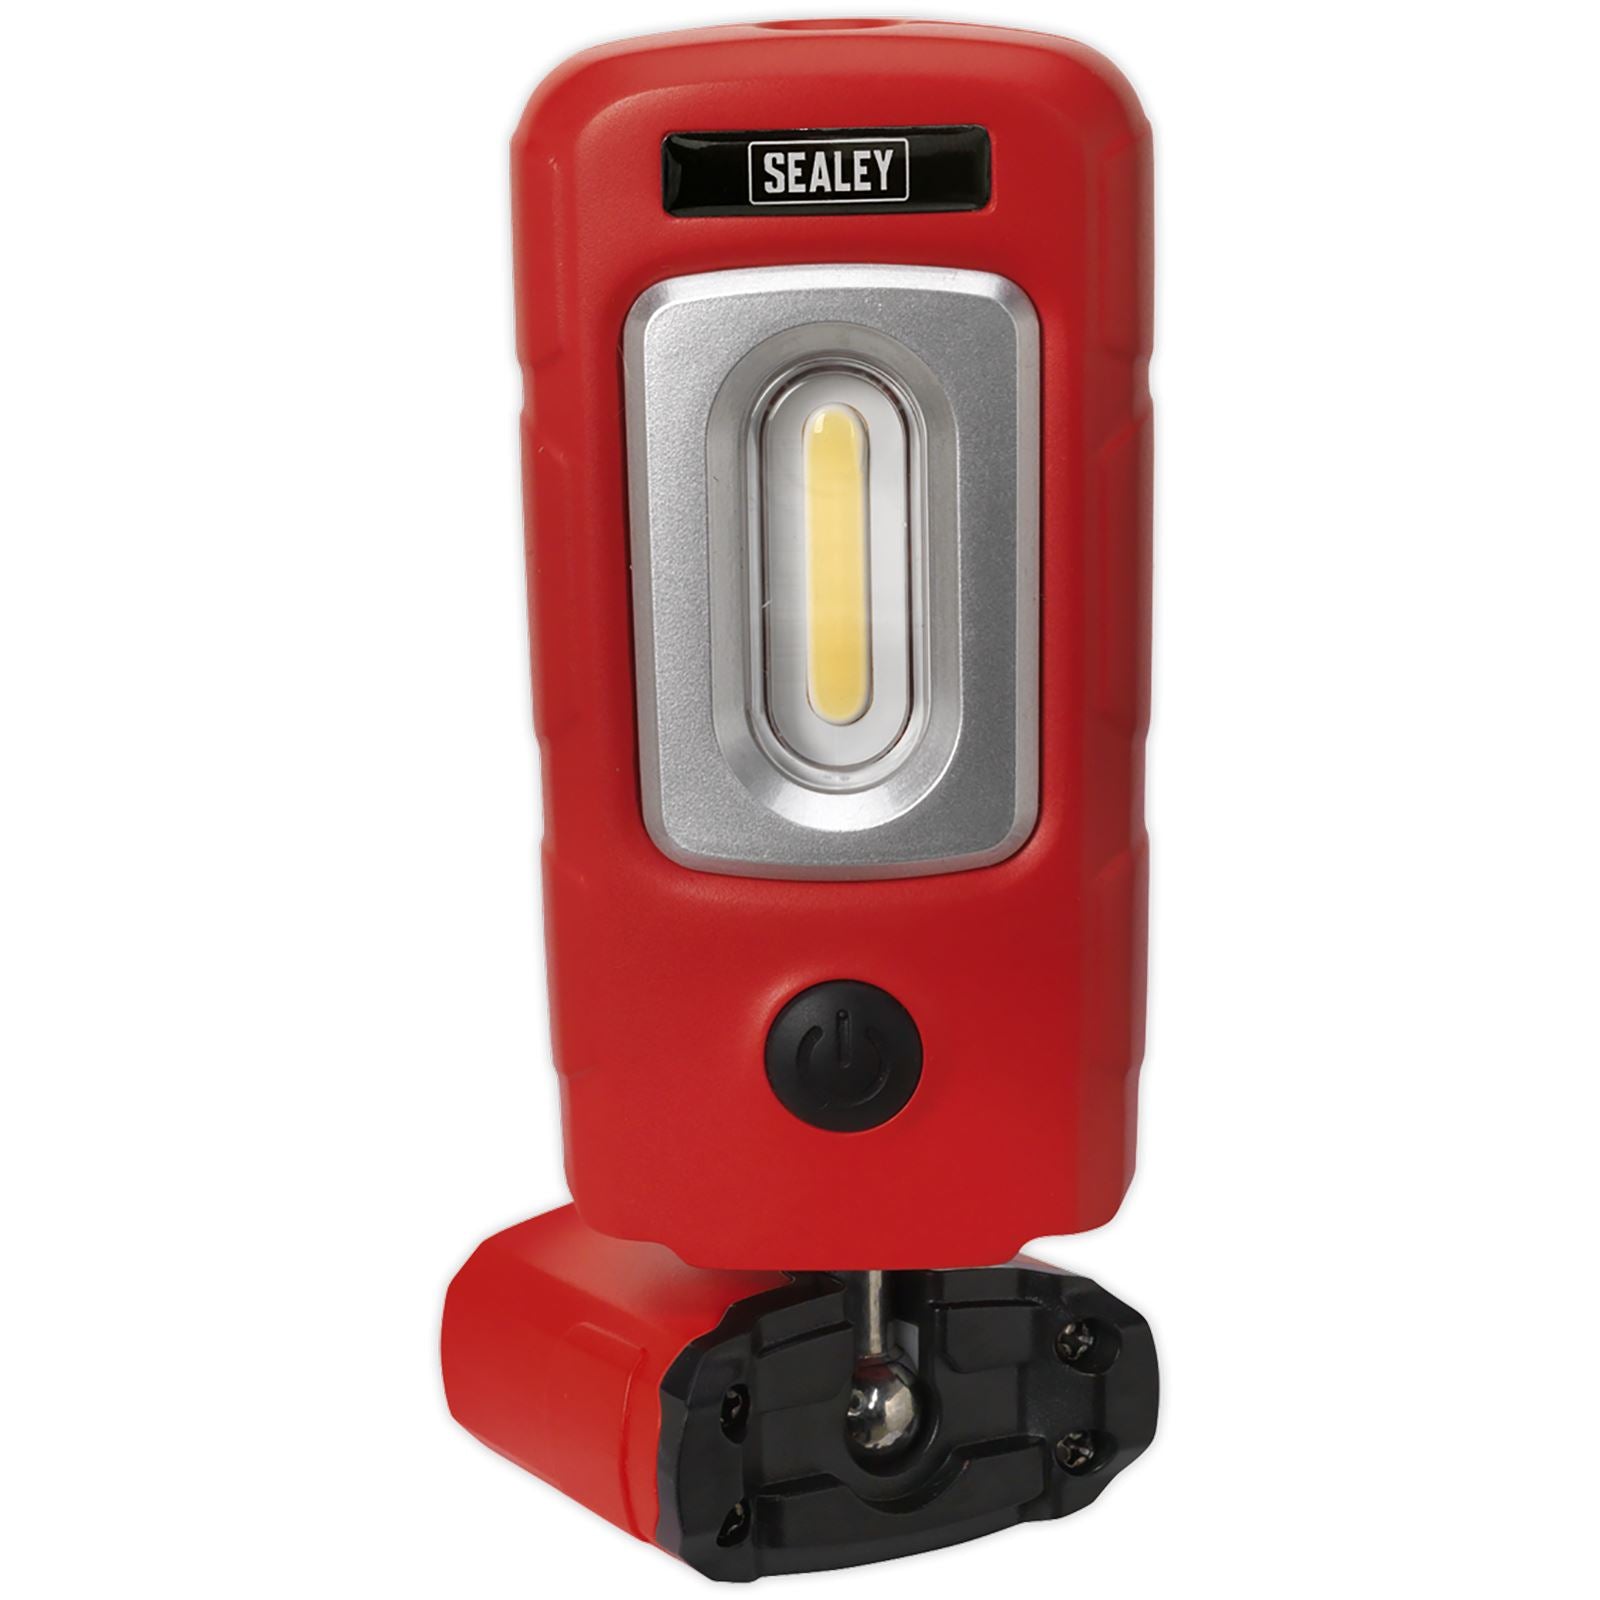 Sealey 360 COB LED Rechargeable Inspection Lamp 300 Lumens